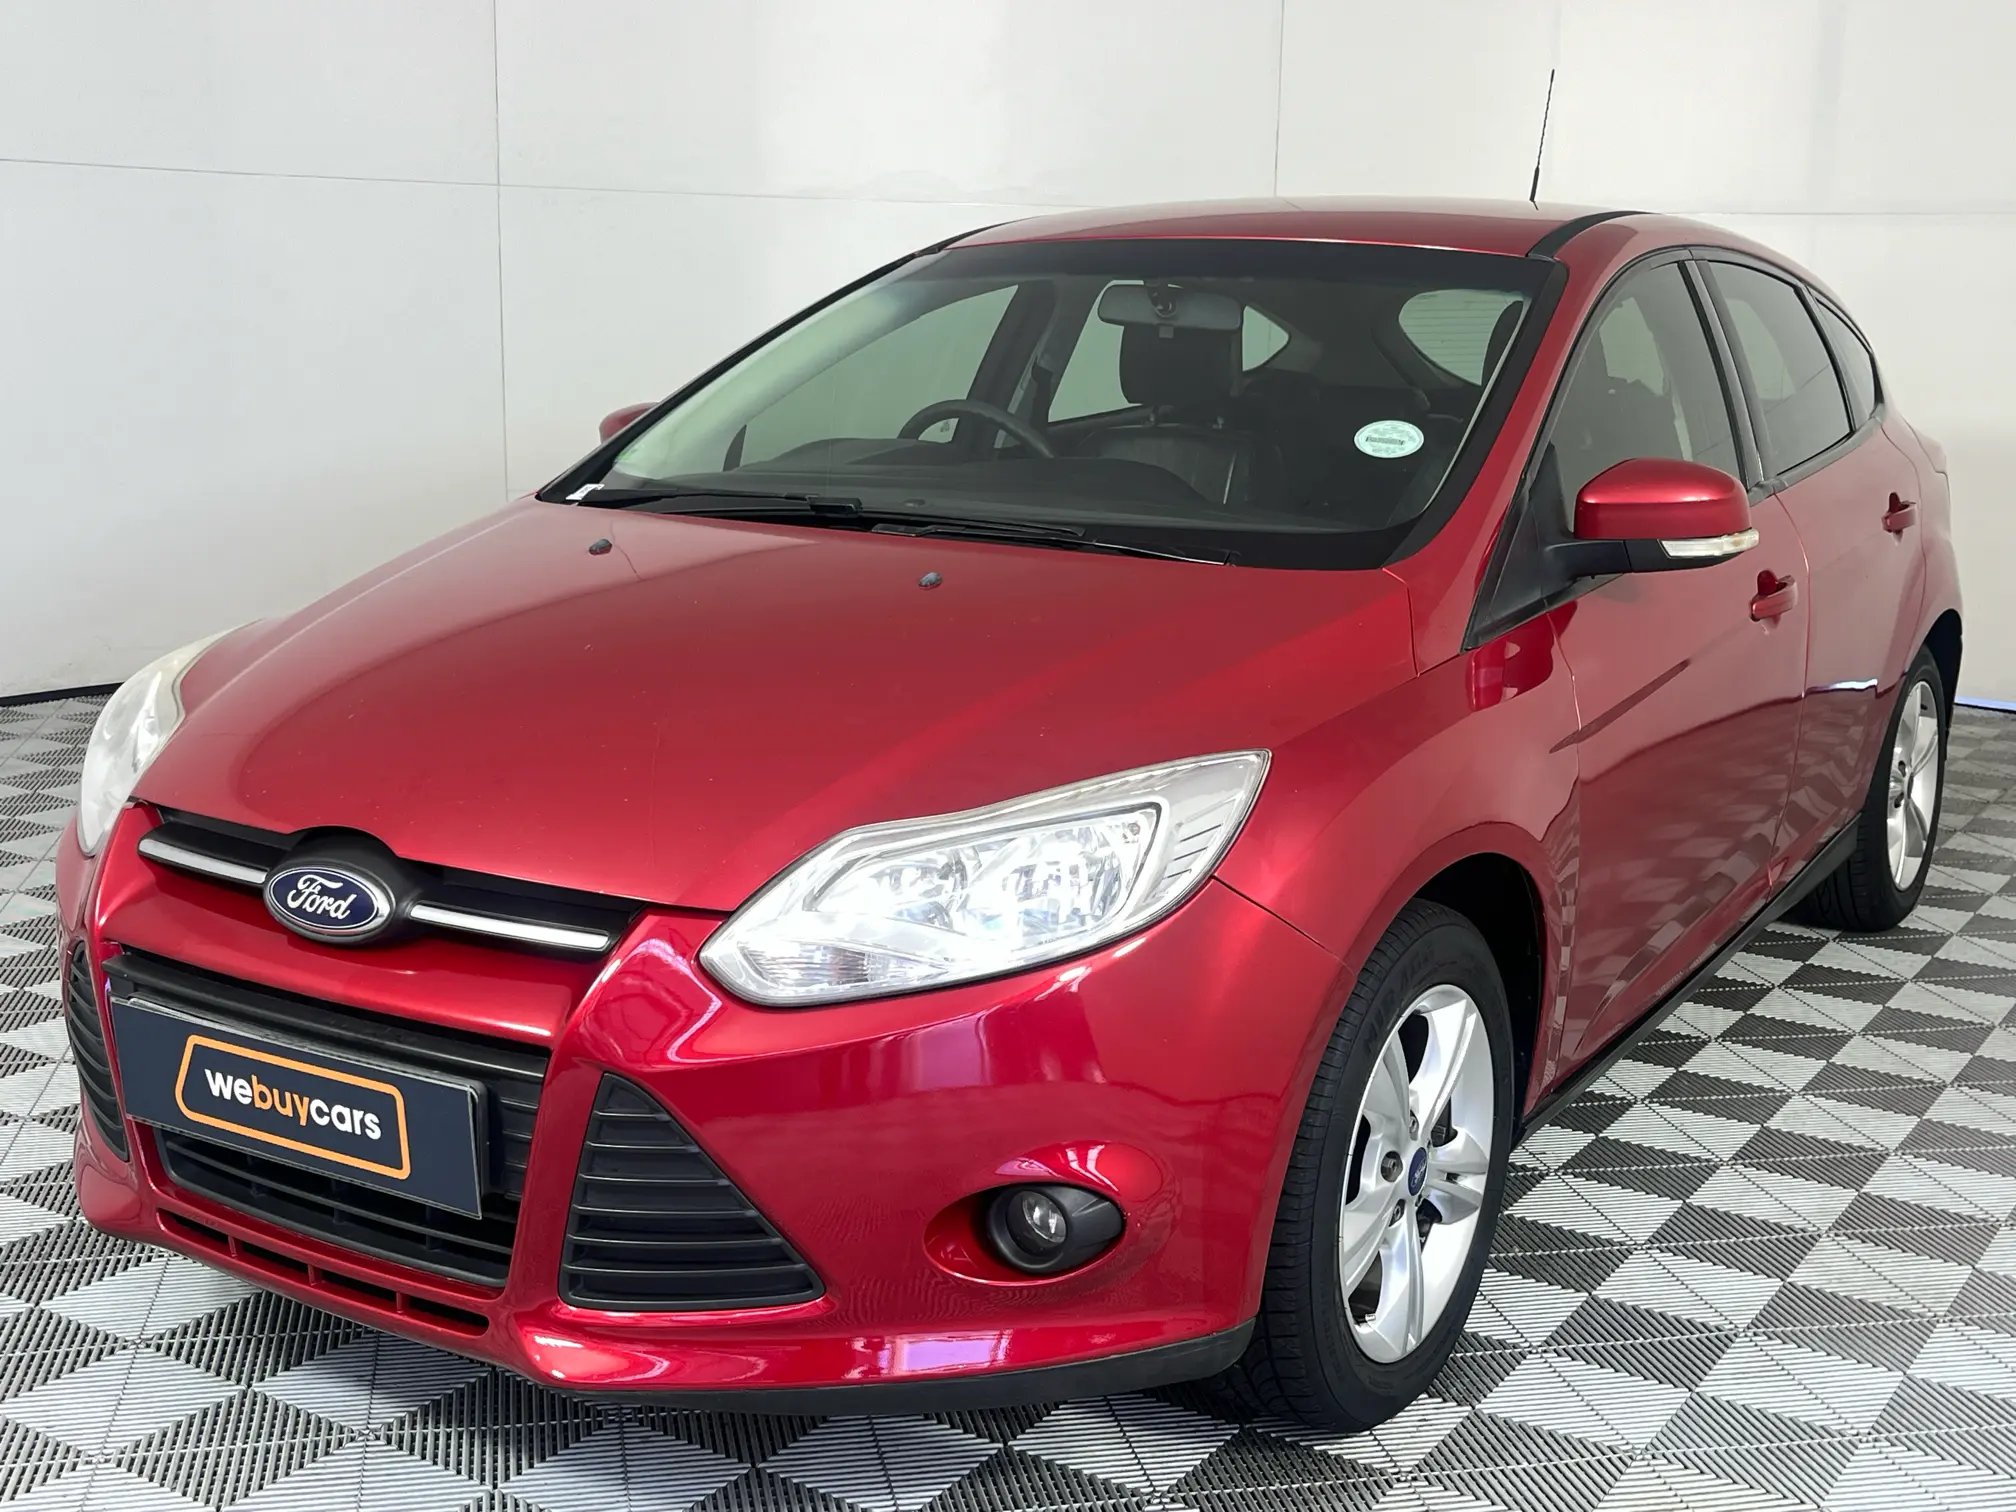 2012 Ford Focus 1.6 TI VCT Trend